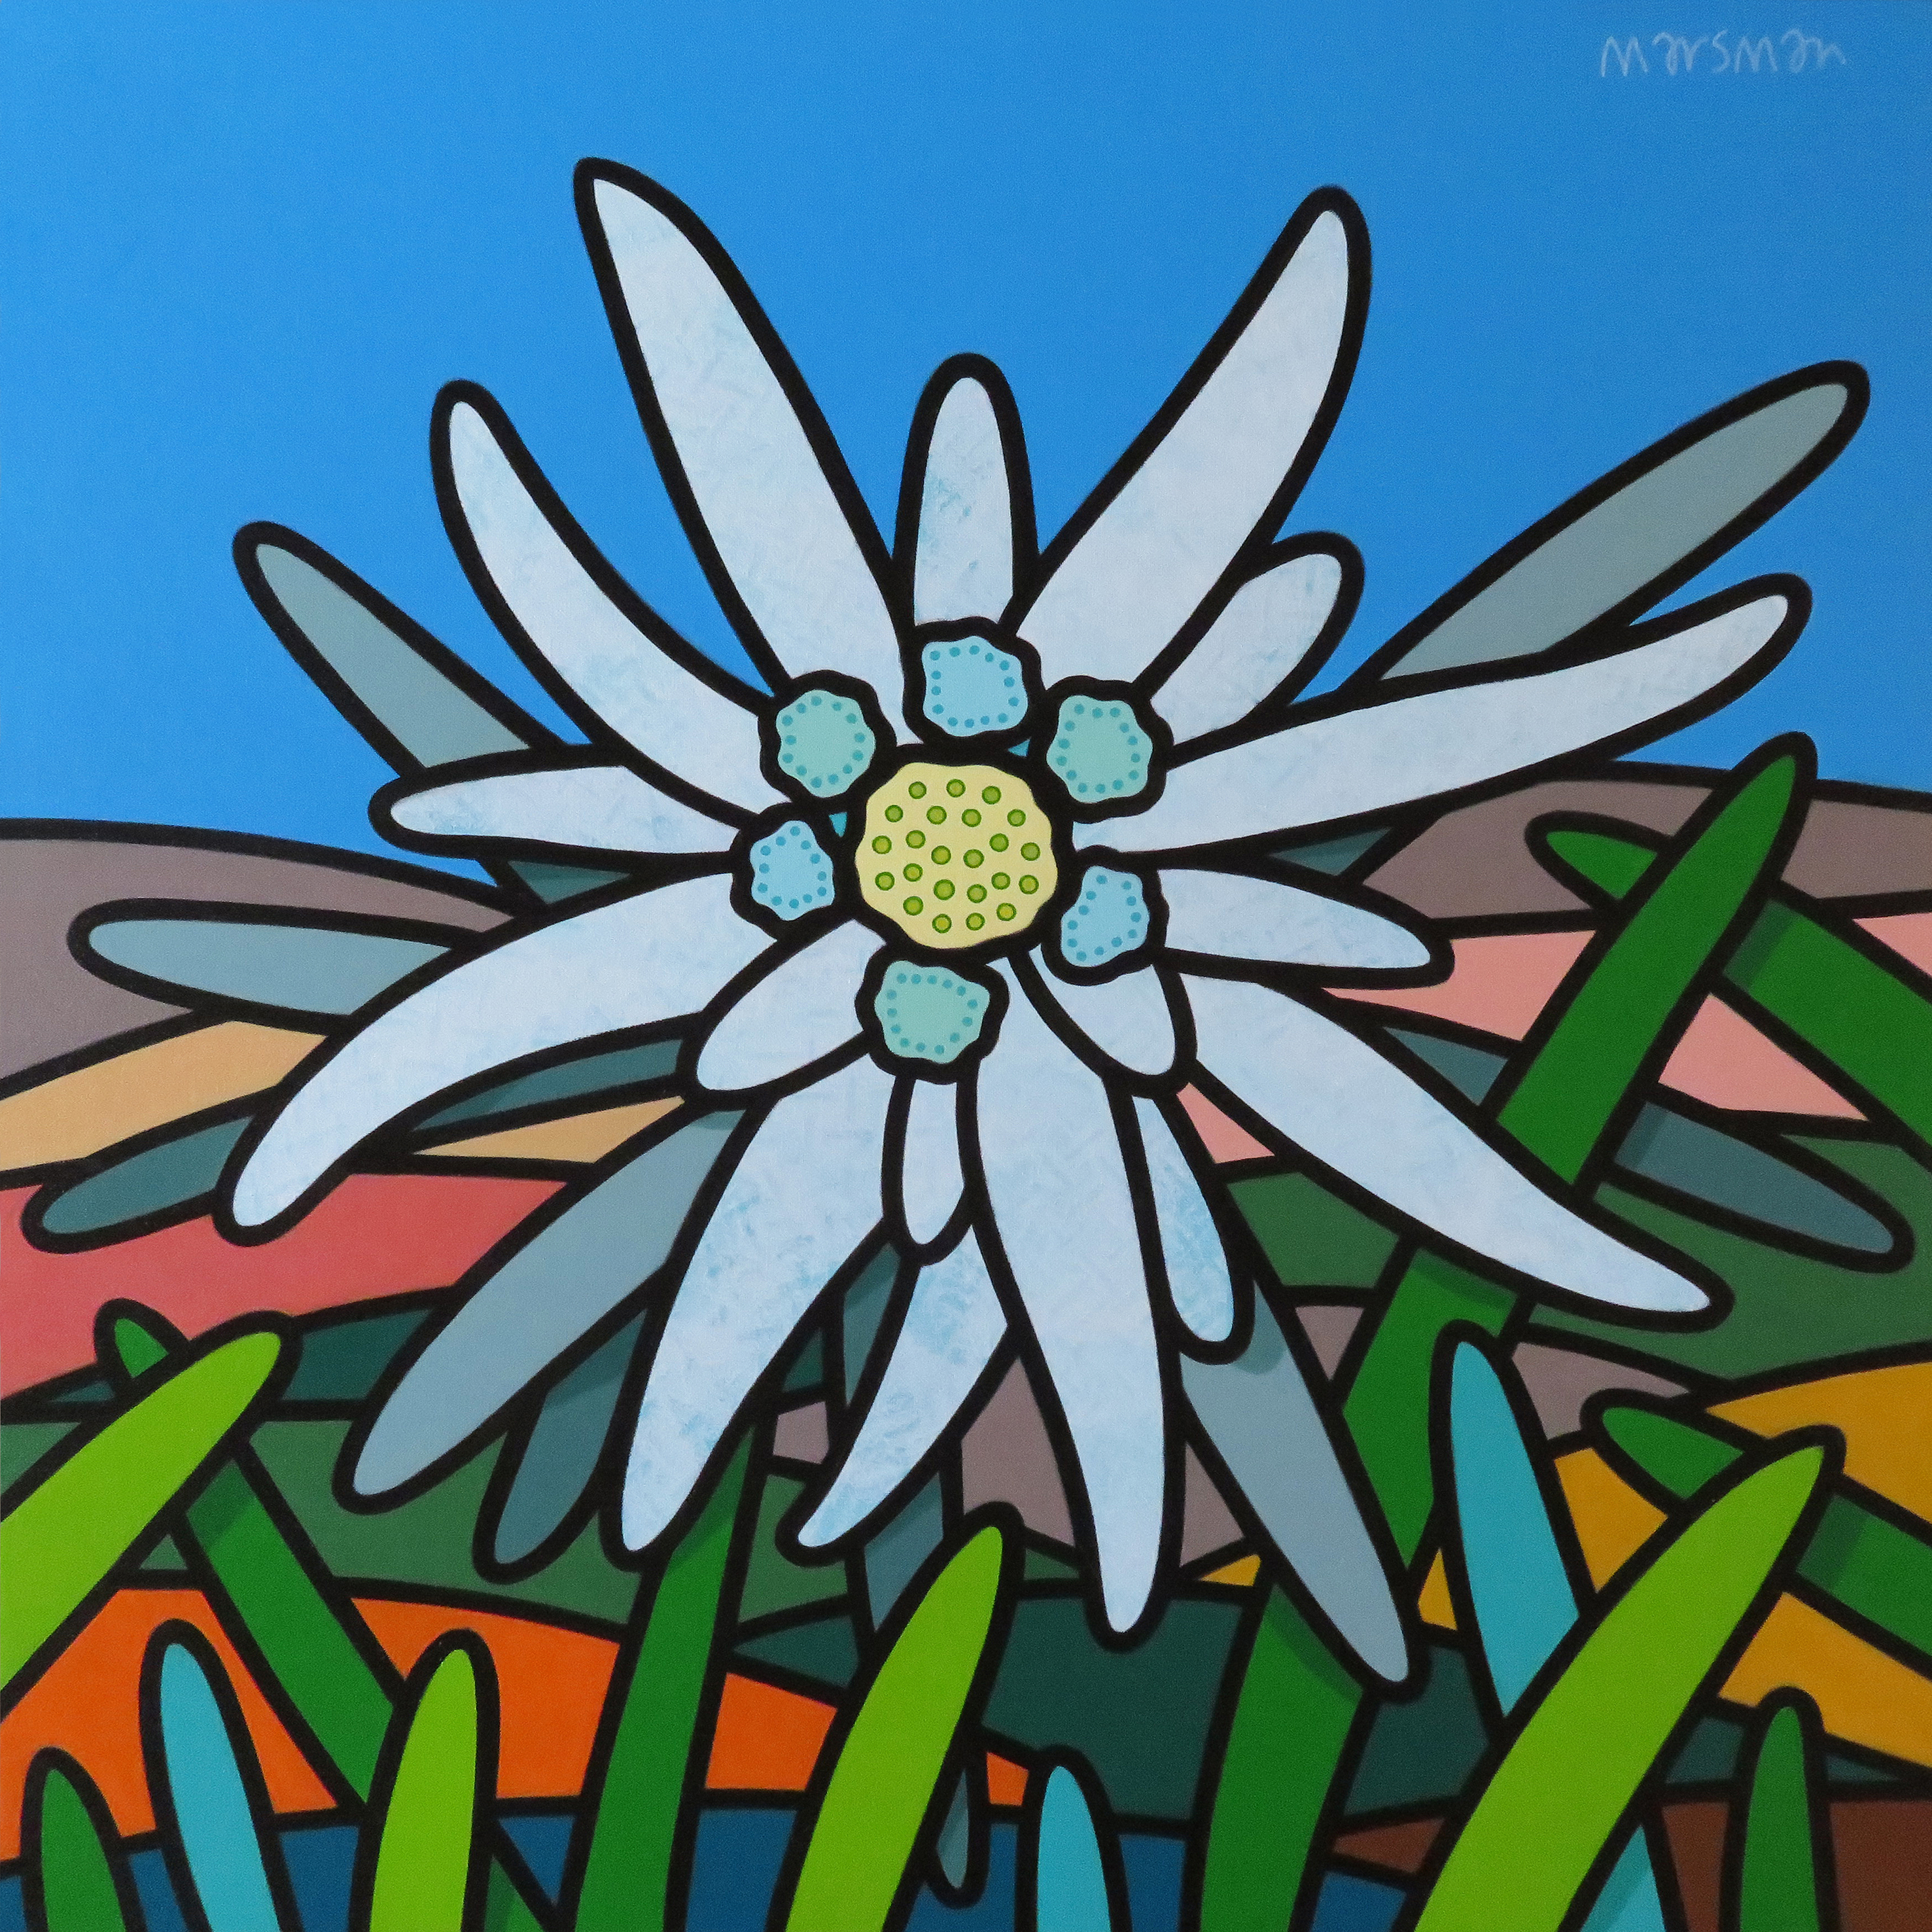 <b>EDELWEISS</b> - 80 x 80 x 3 cm - acrylic on canvas - FOR SALE  <a style="color: red; text-decoration: none" href="mailto:jpgpmarsman@onsbrabantnet.nl">BESTEL</a>